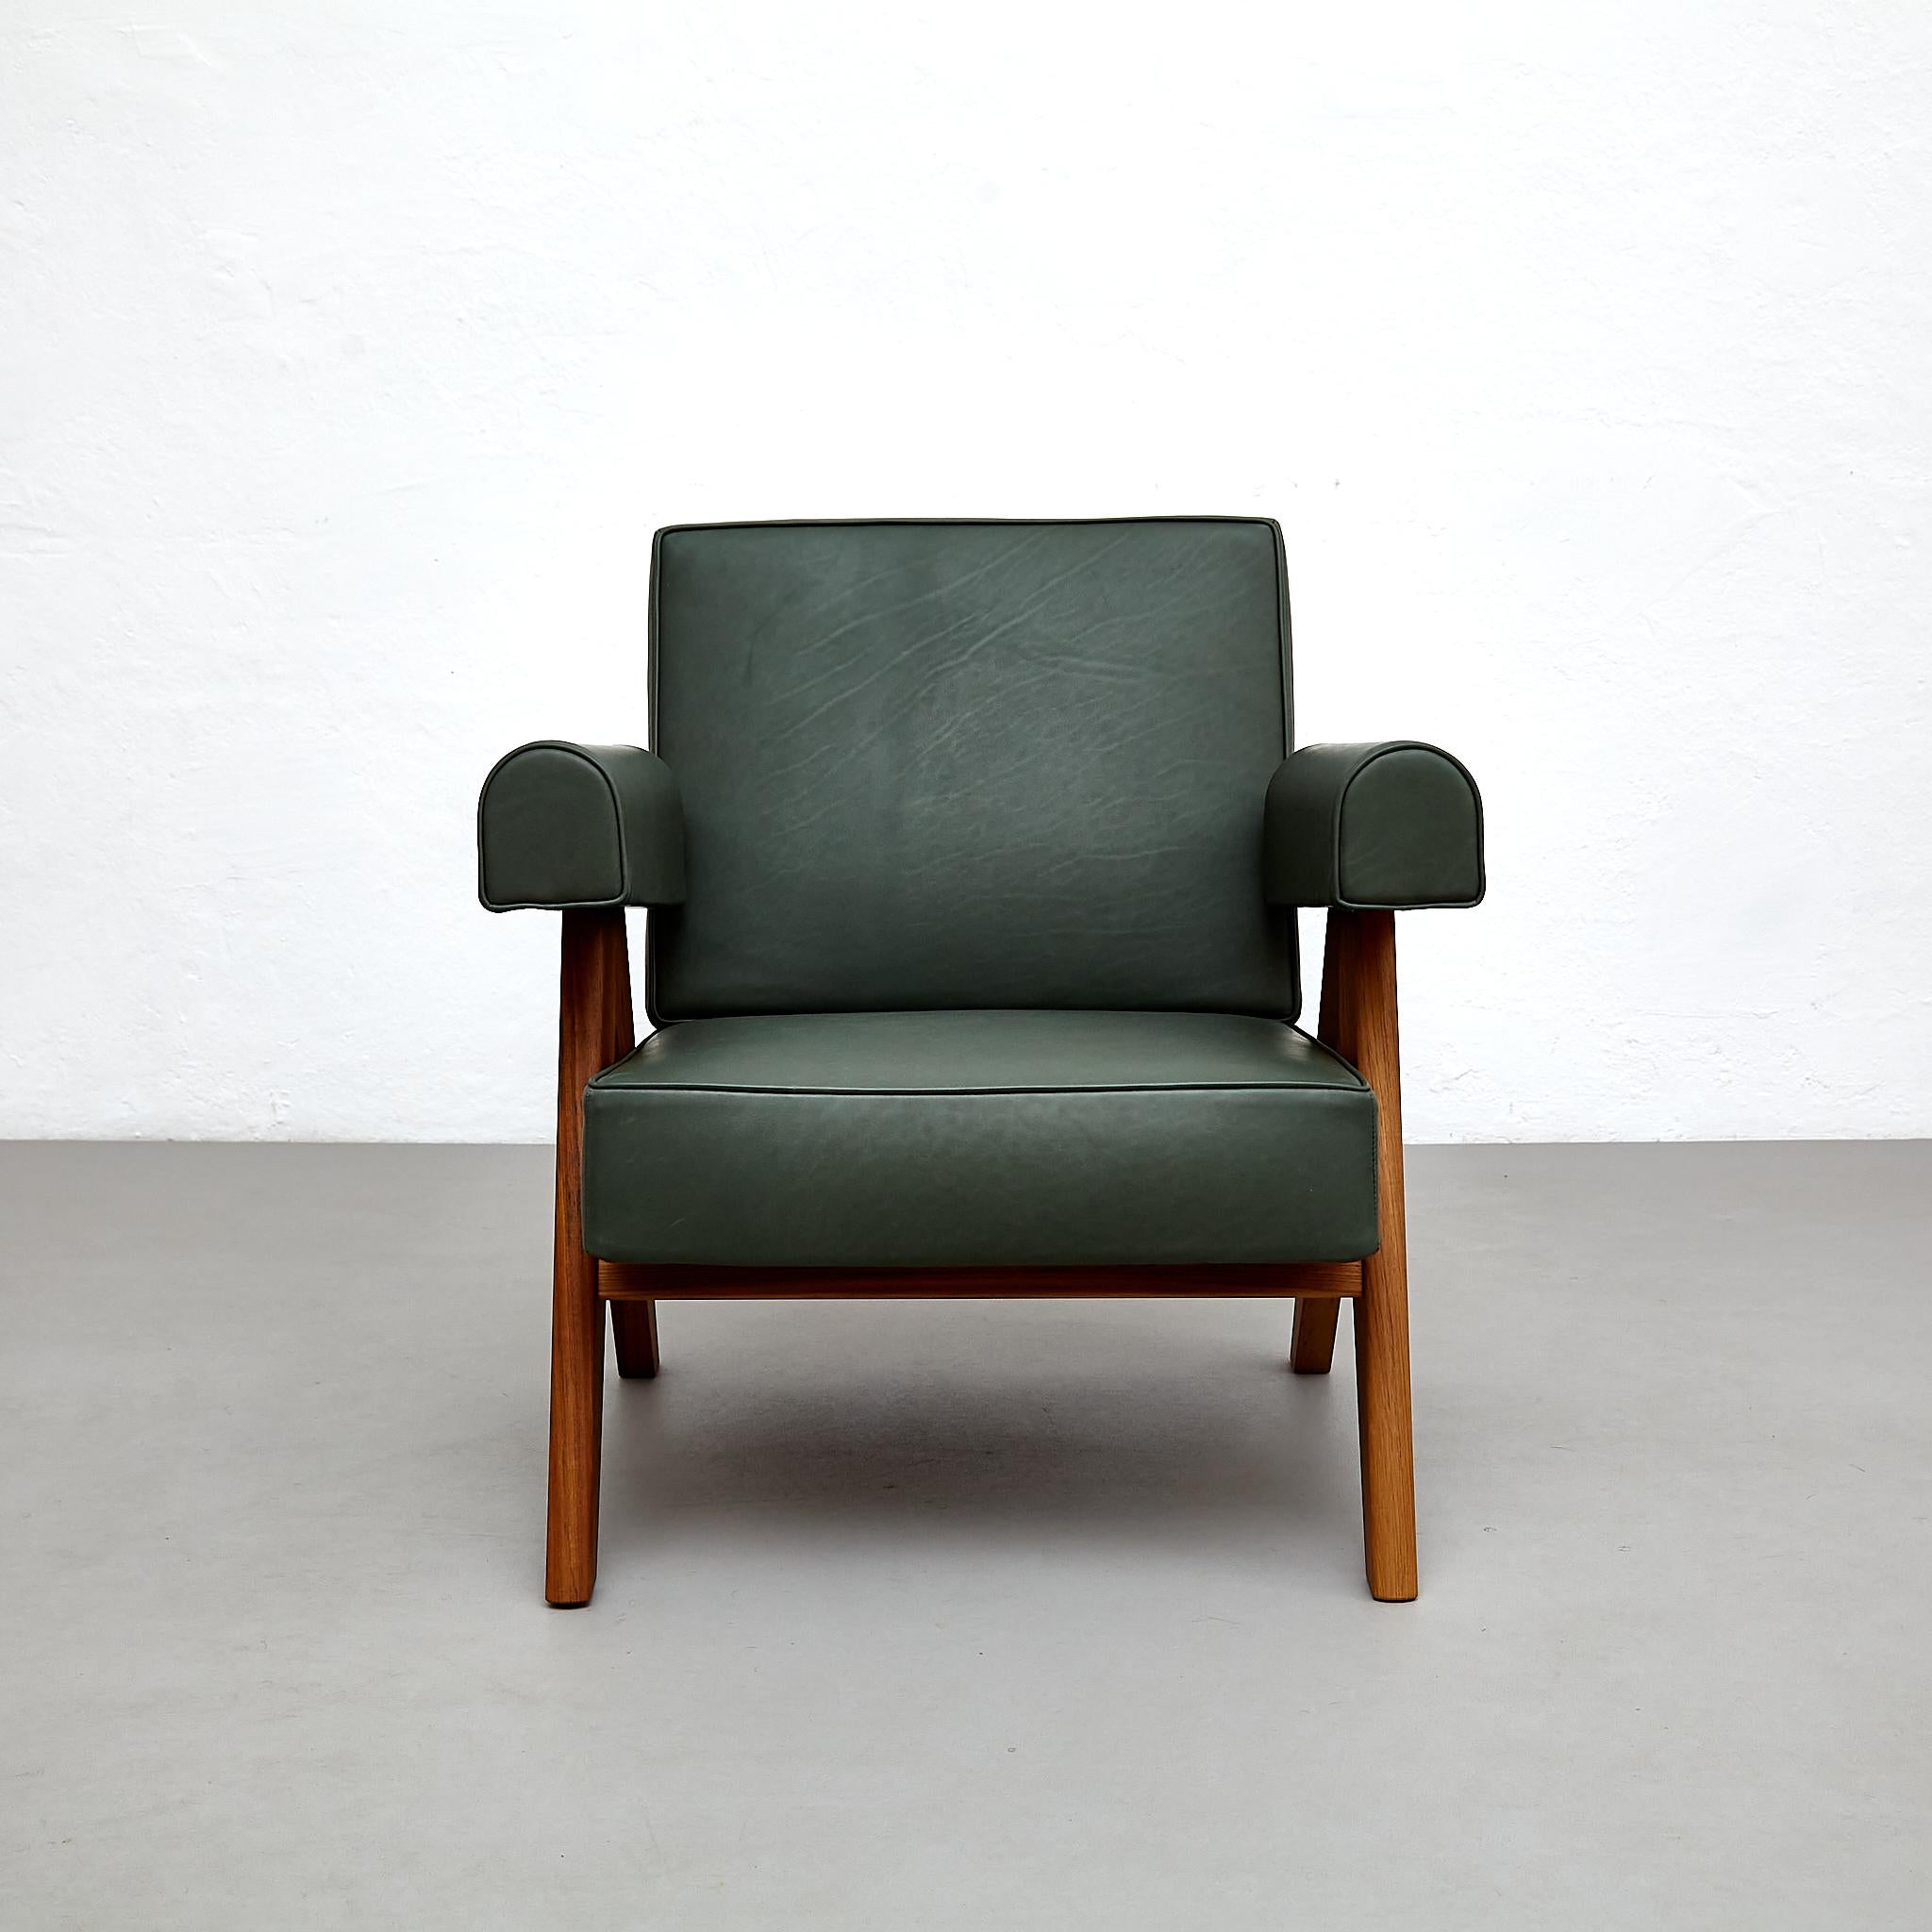 Set of Two Pierre Jeanneret Teak Wood Green Leather Armchair by Cassina For Sale 1